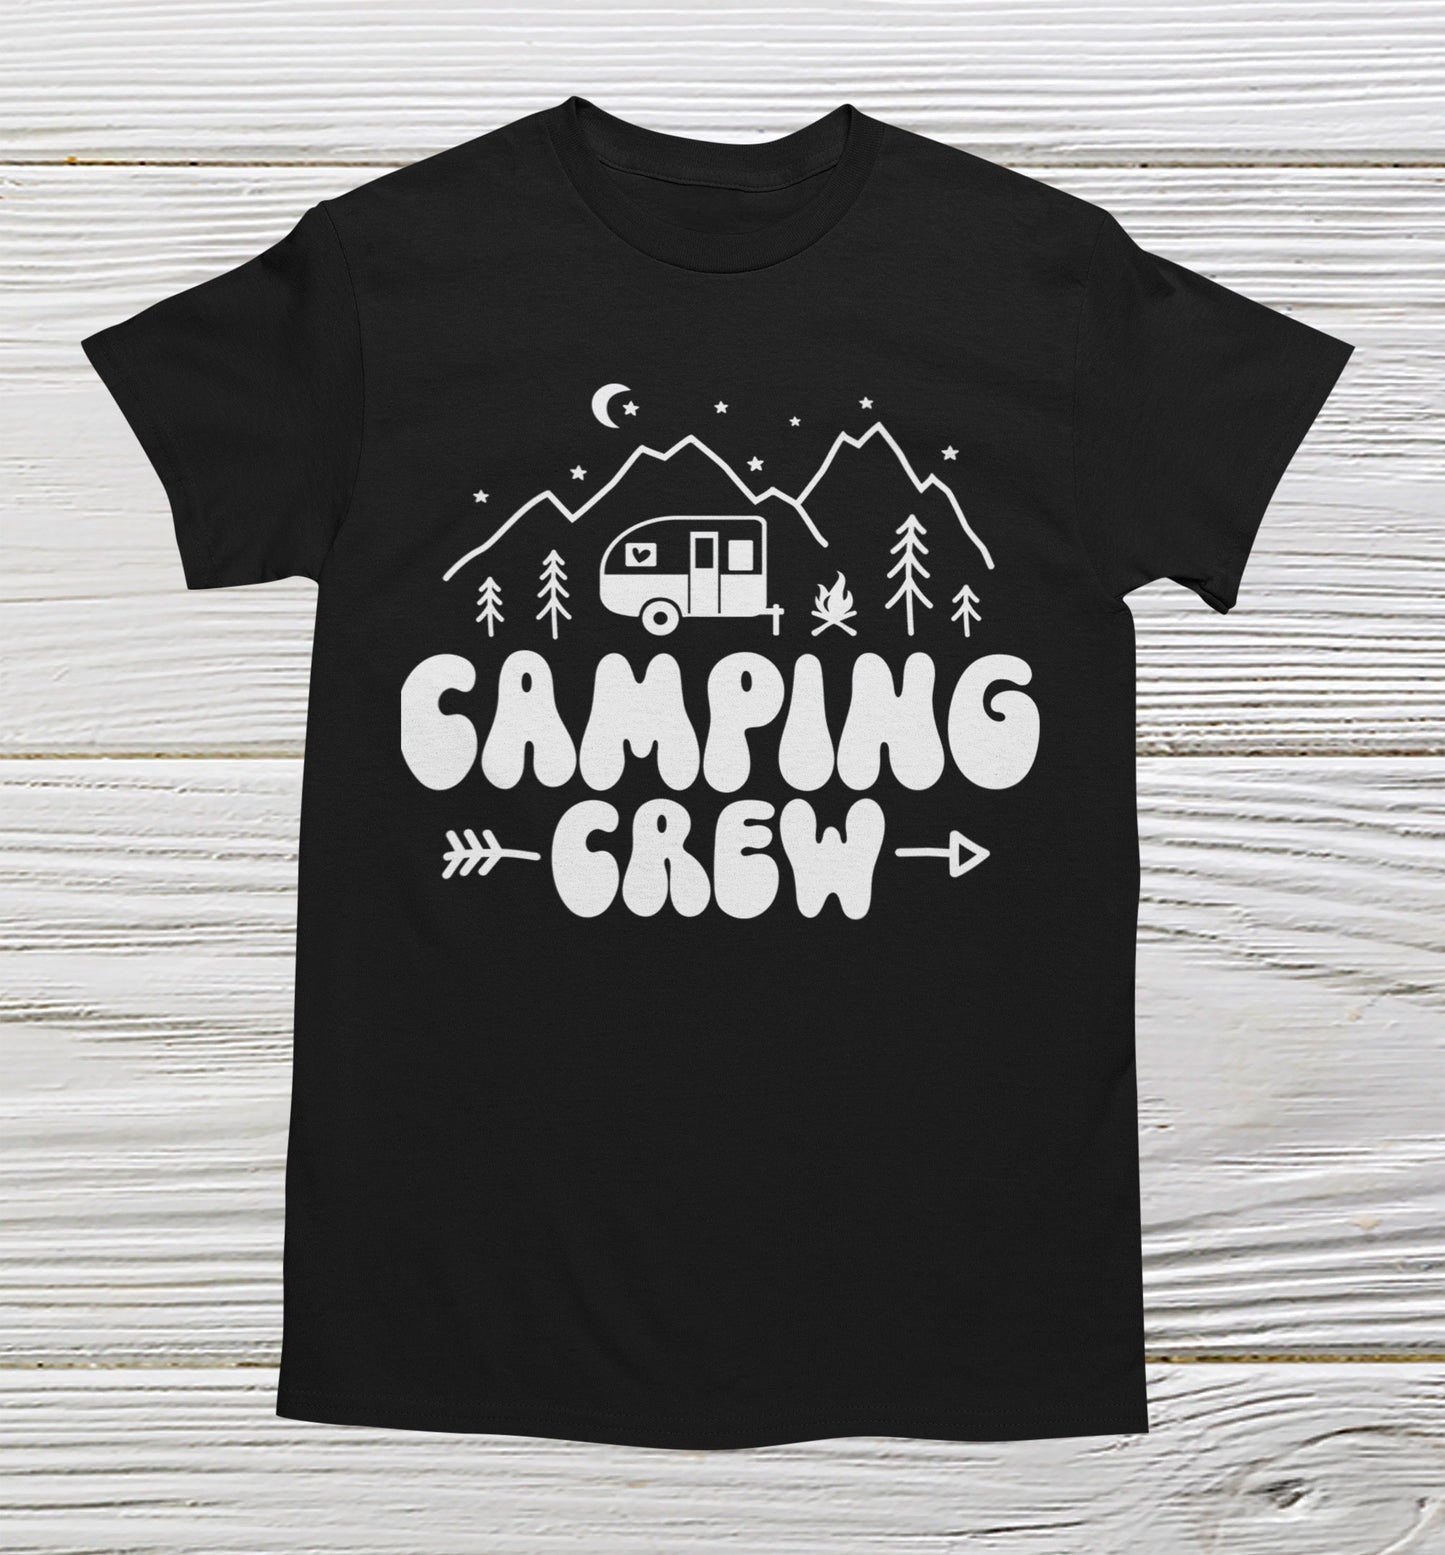 Camping Crew shirts in black color